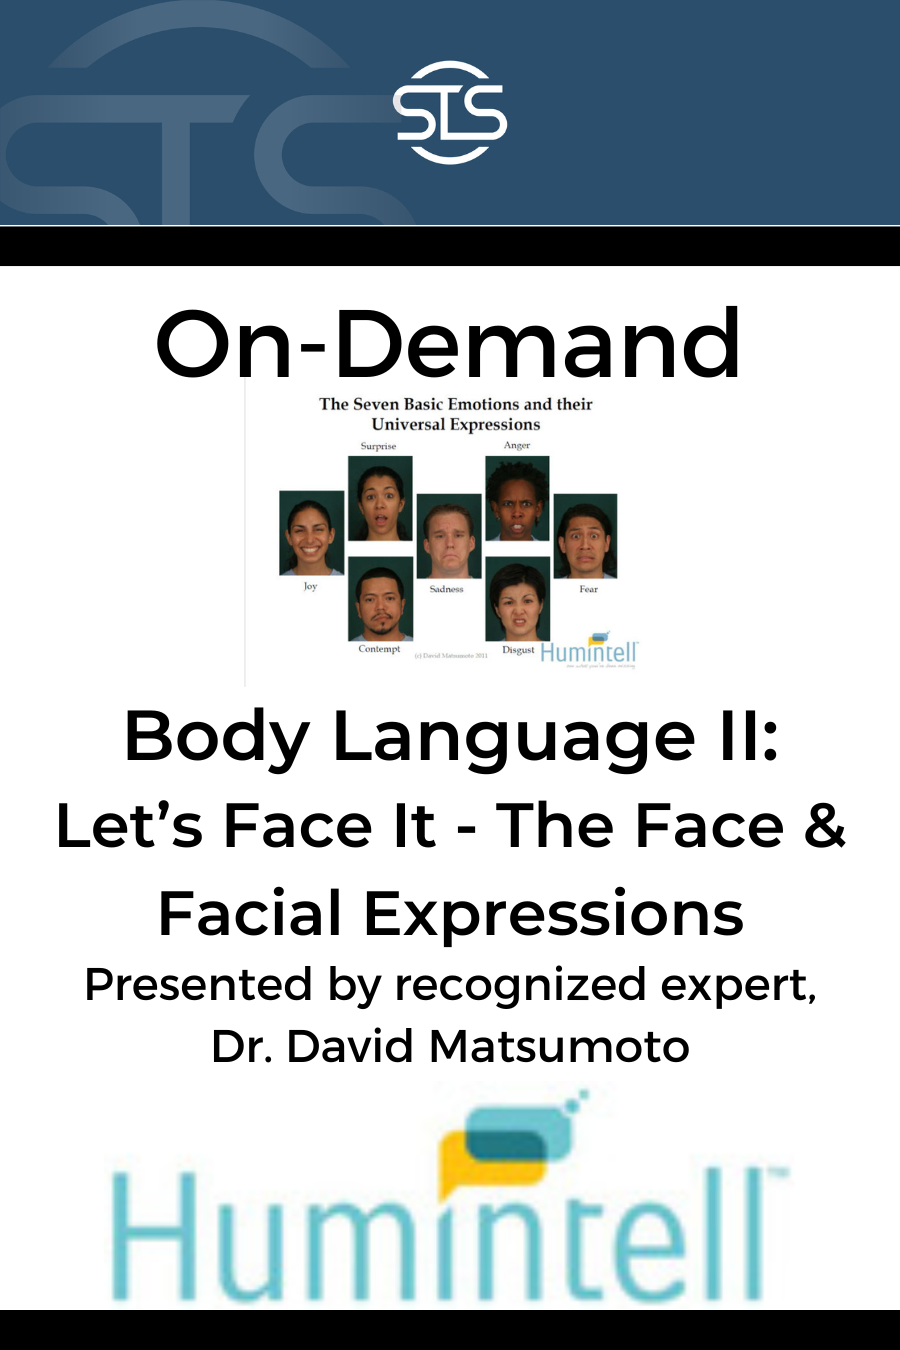 Body Language II: Let’s Face It – The Face & Facial Expressions